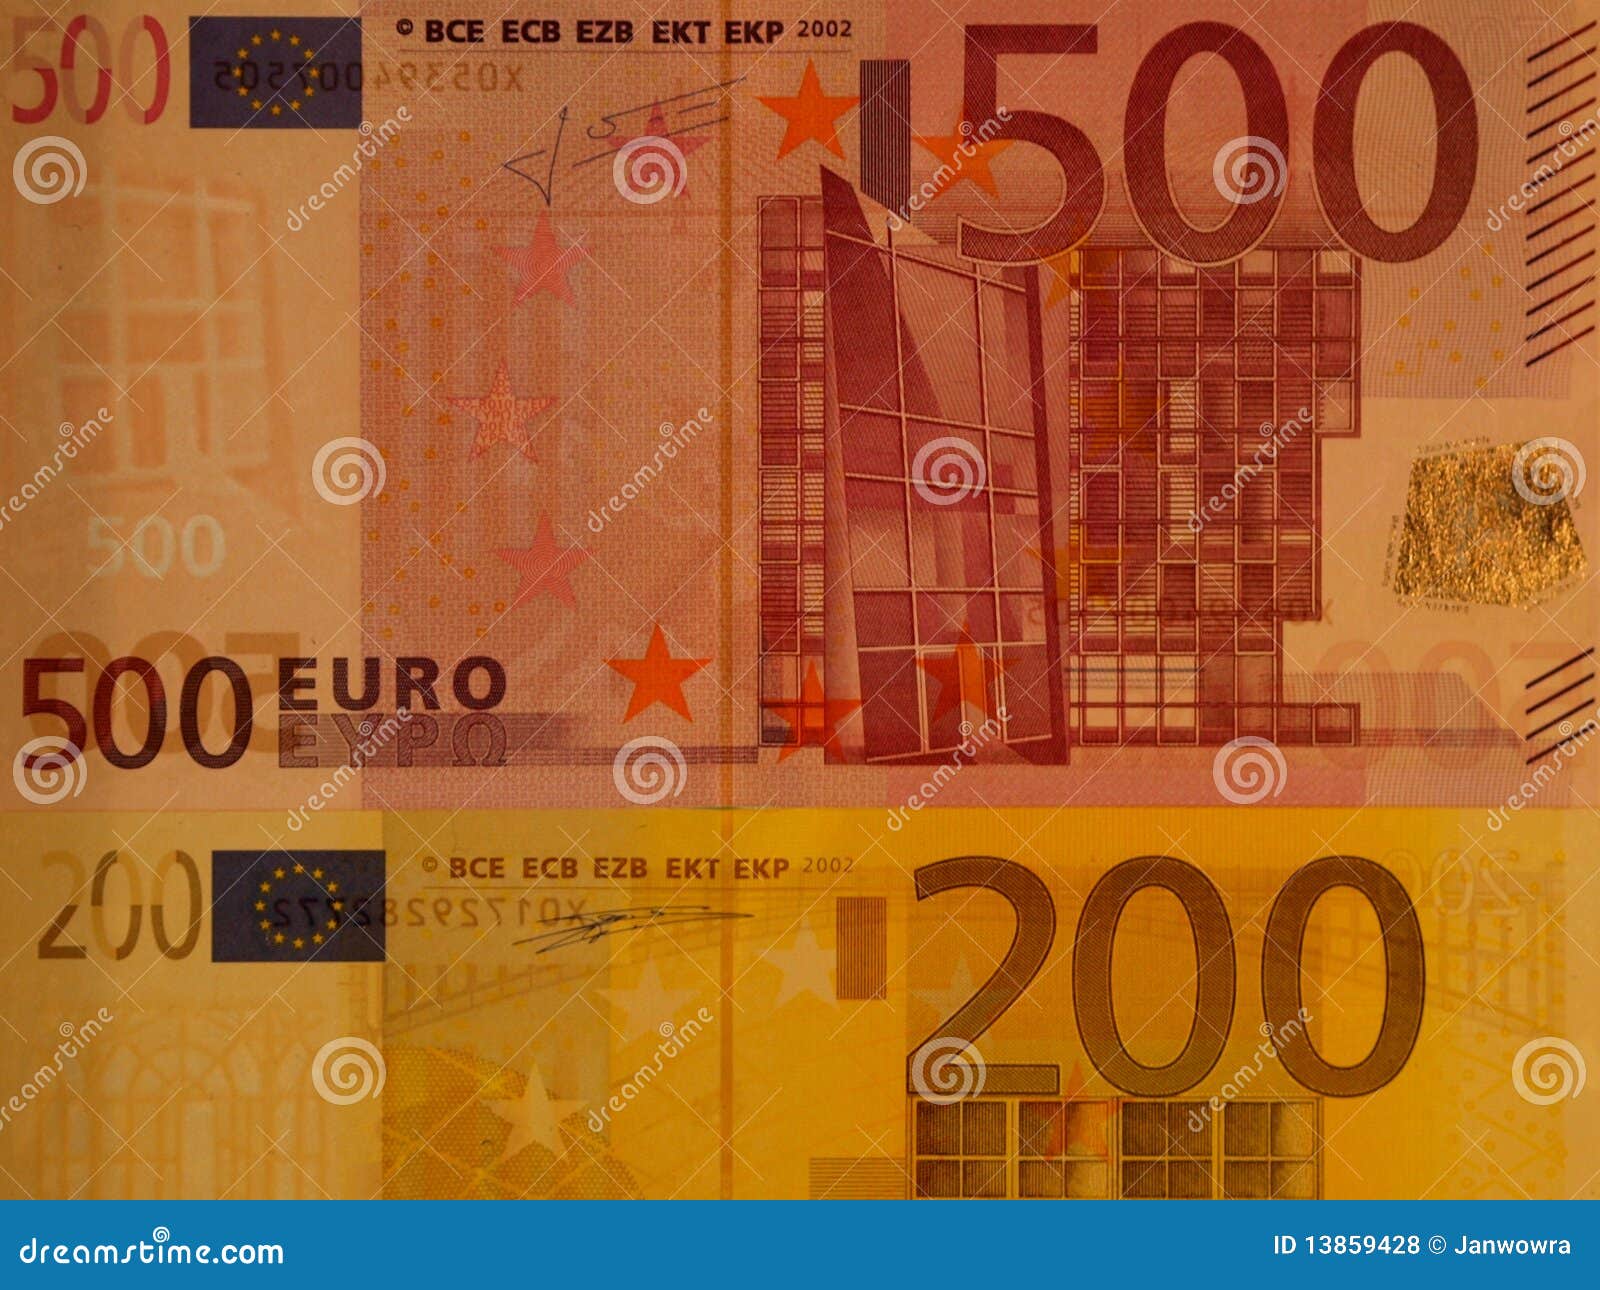 Download this Royalty Free Stock Photos Paper Money Europe picture